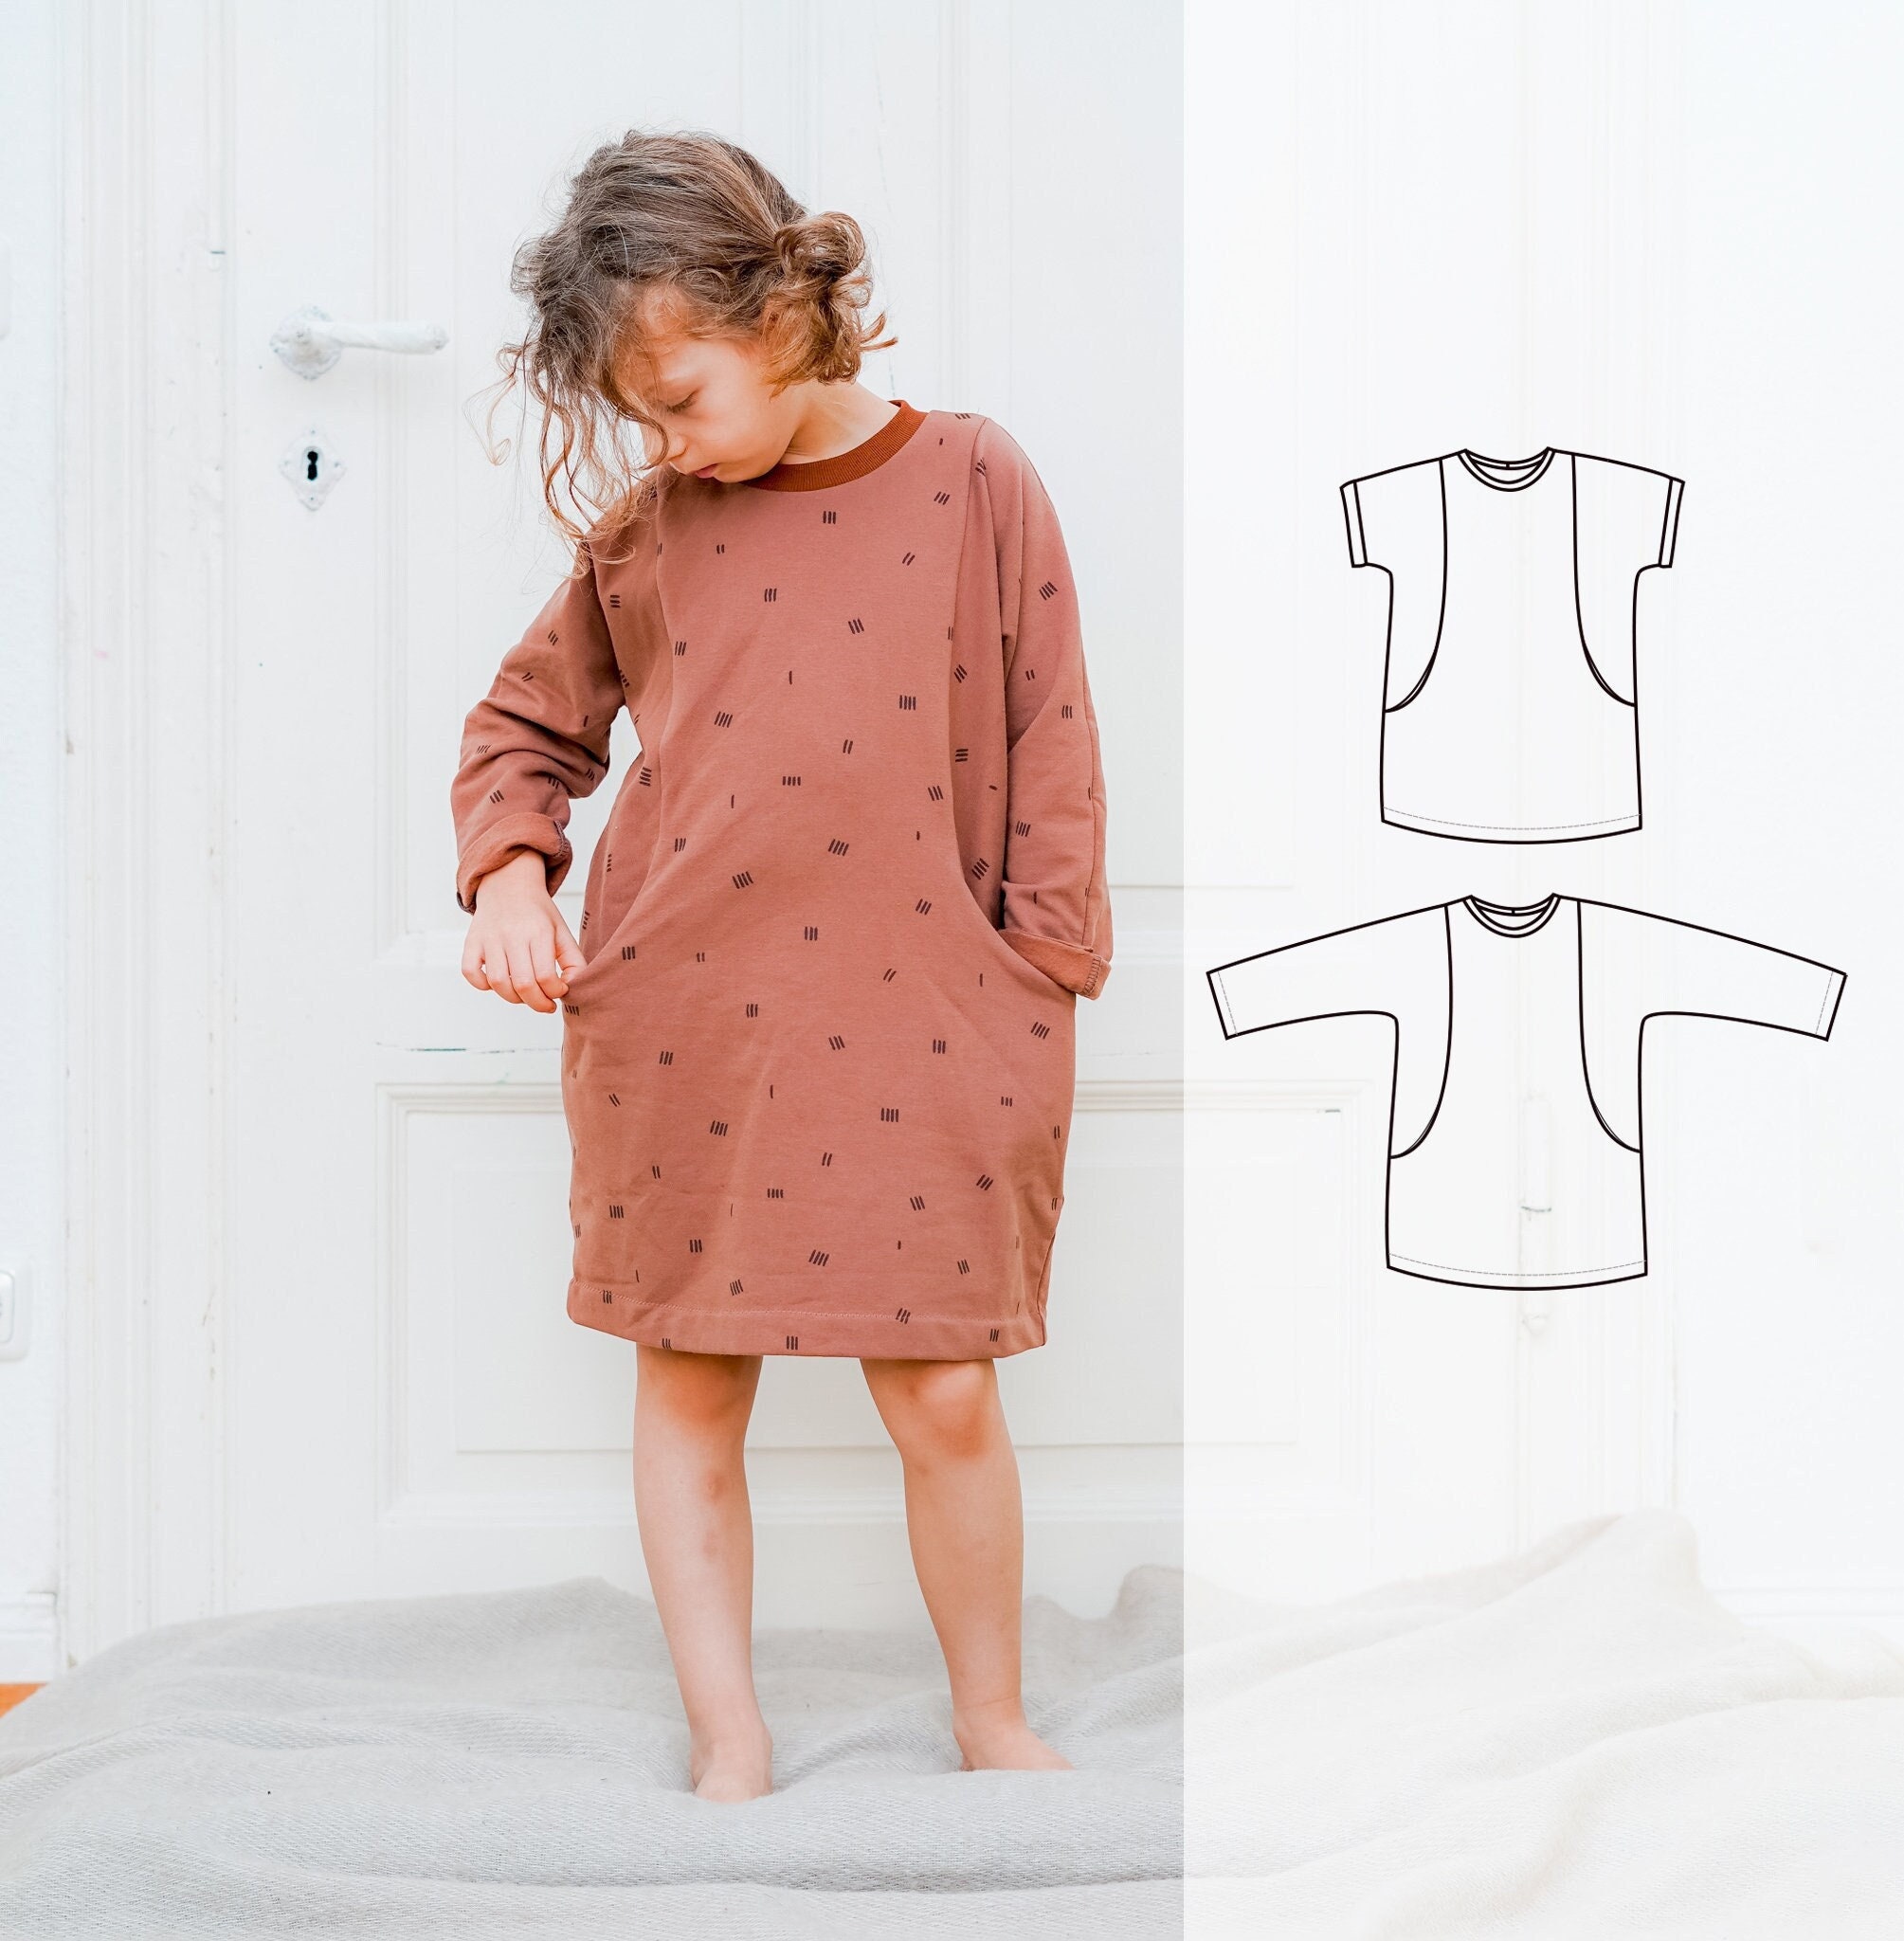 Children's Dress Sewing Pattern With Pockets, the Rainy Day Dress